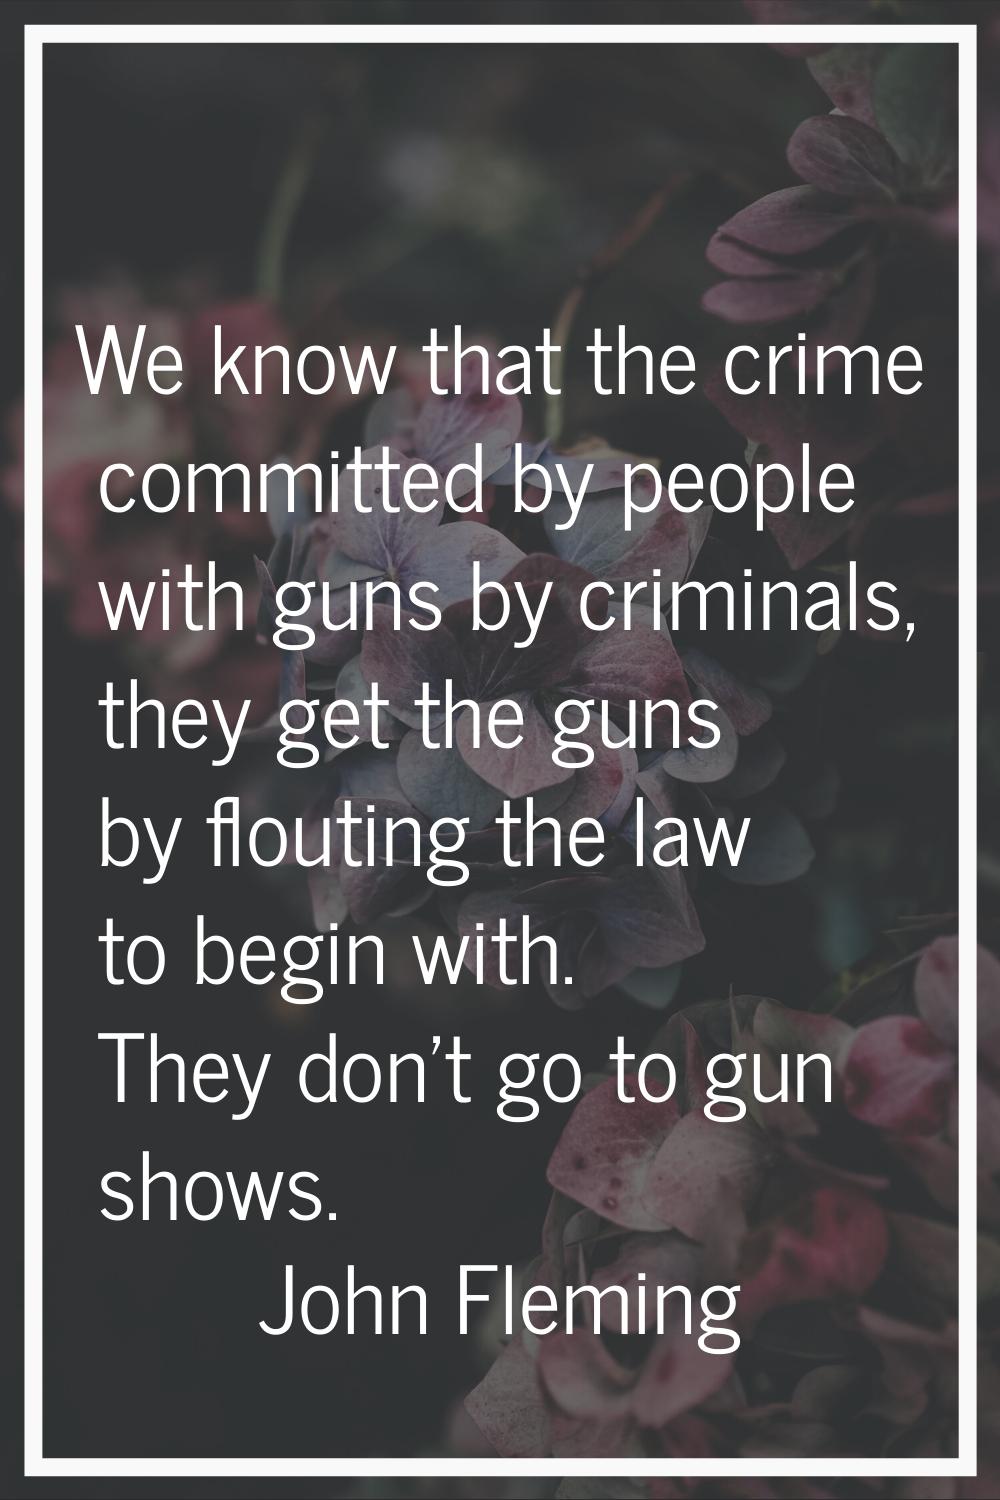 We know that the crime committed by people with guns by criminals, they get the guns by flouting th